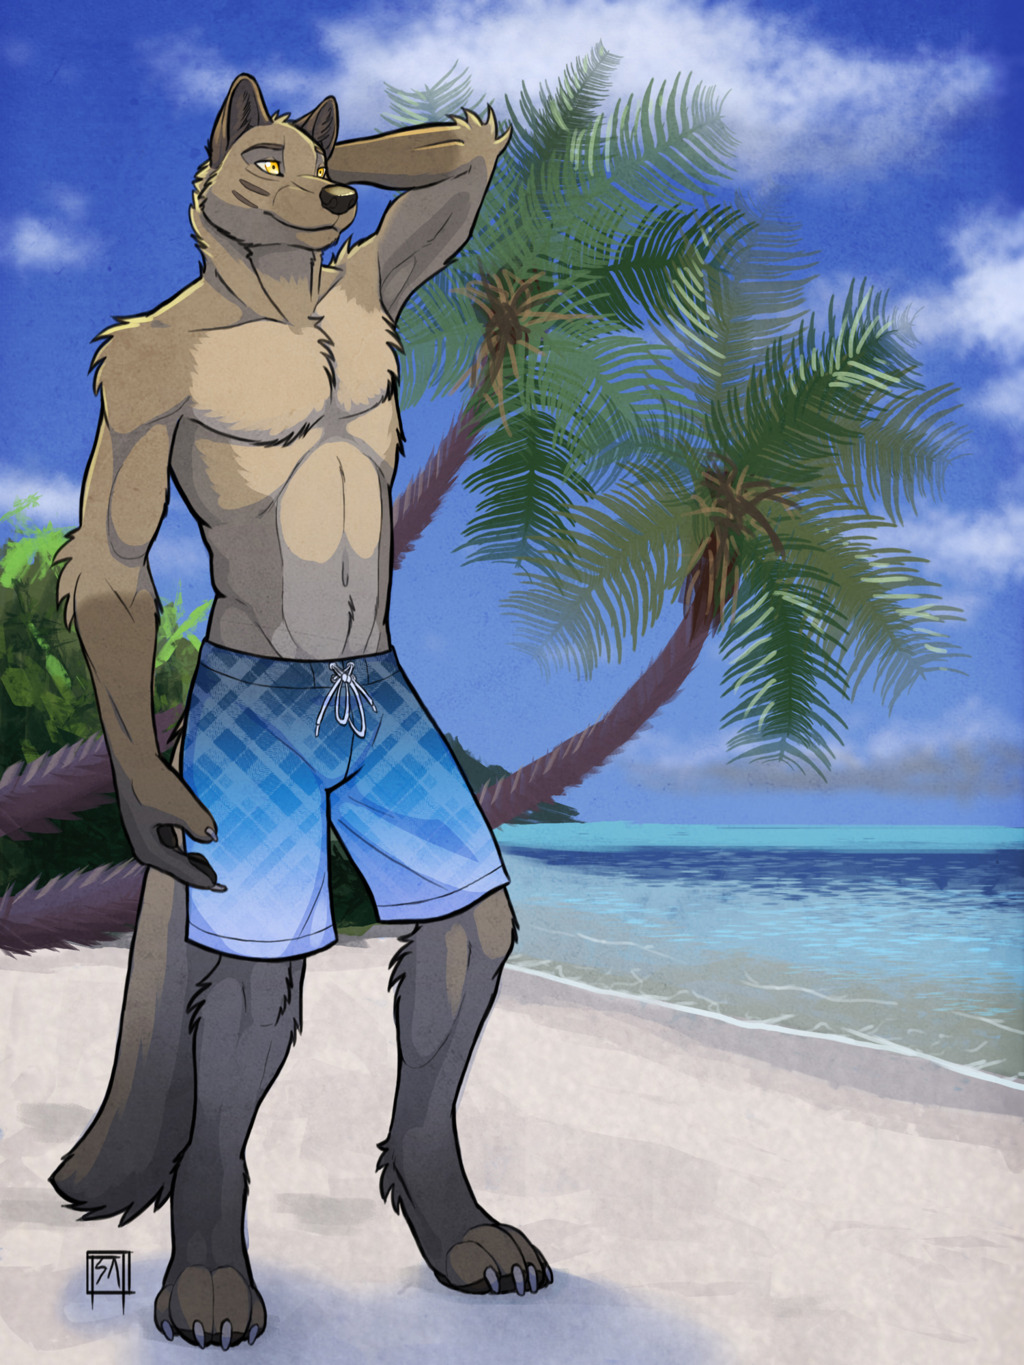 This awesome drawing was made by the awesome Tsaiwolf